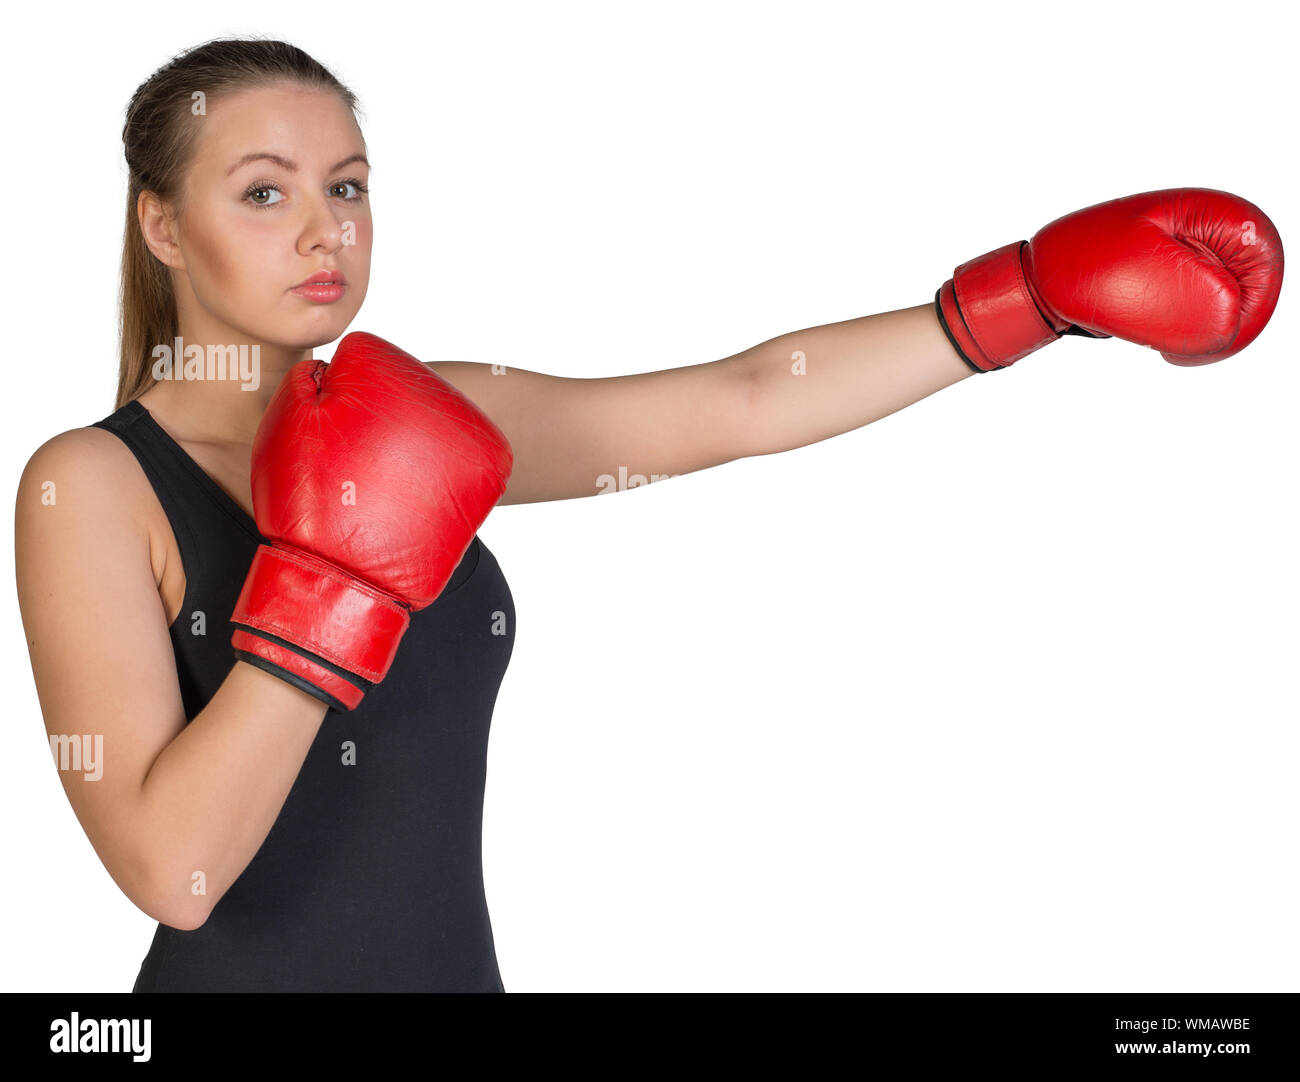 Woman wearing boxing gloves, in punching pose, looking at camera. Isolated on white background Stock Photo